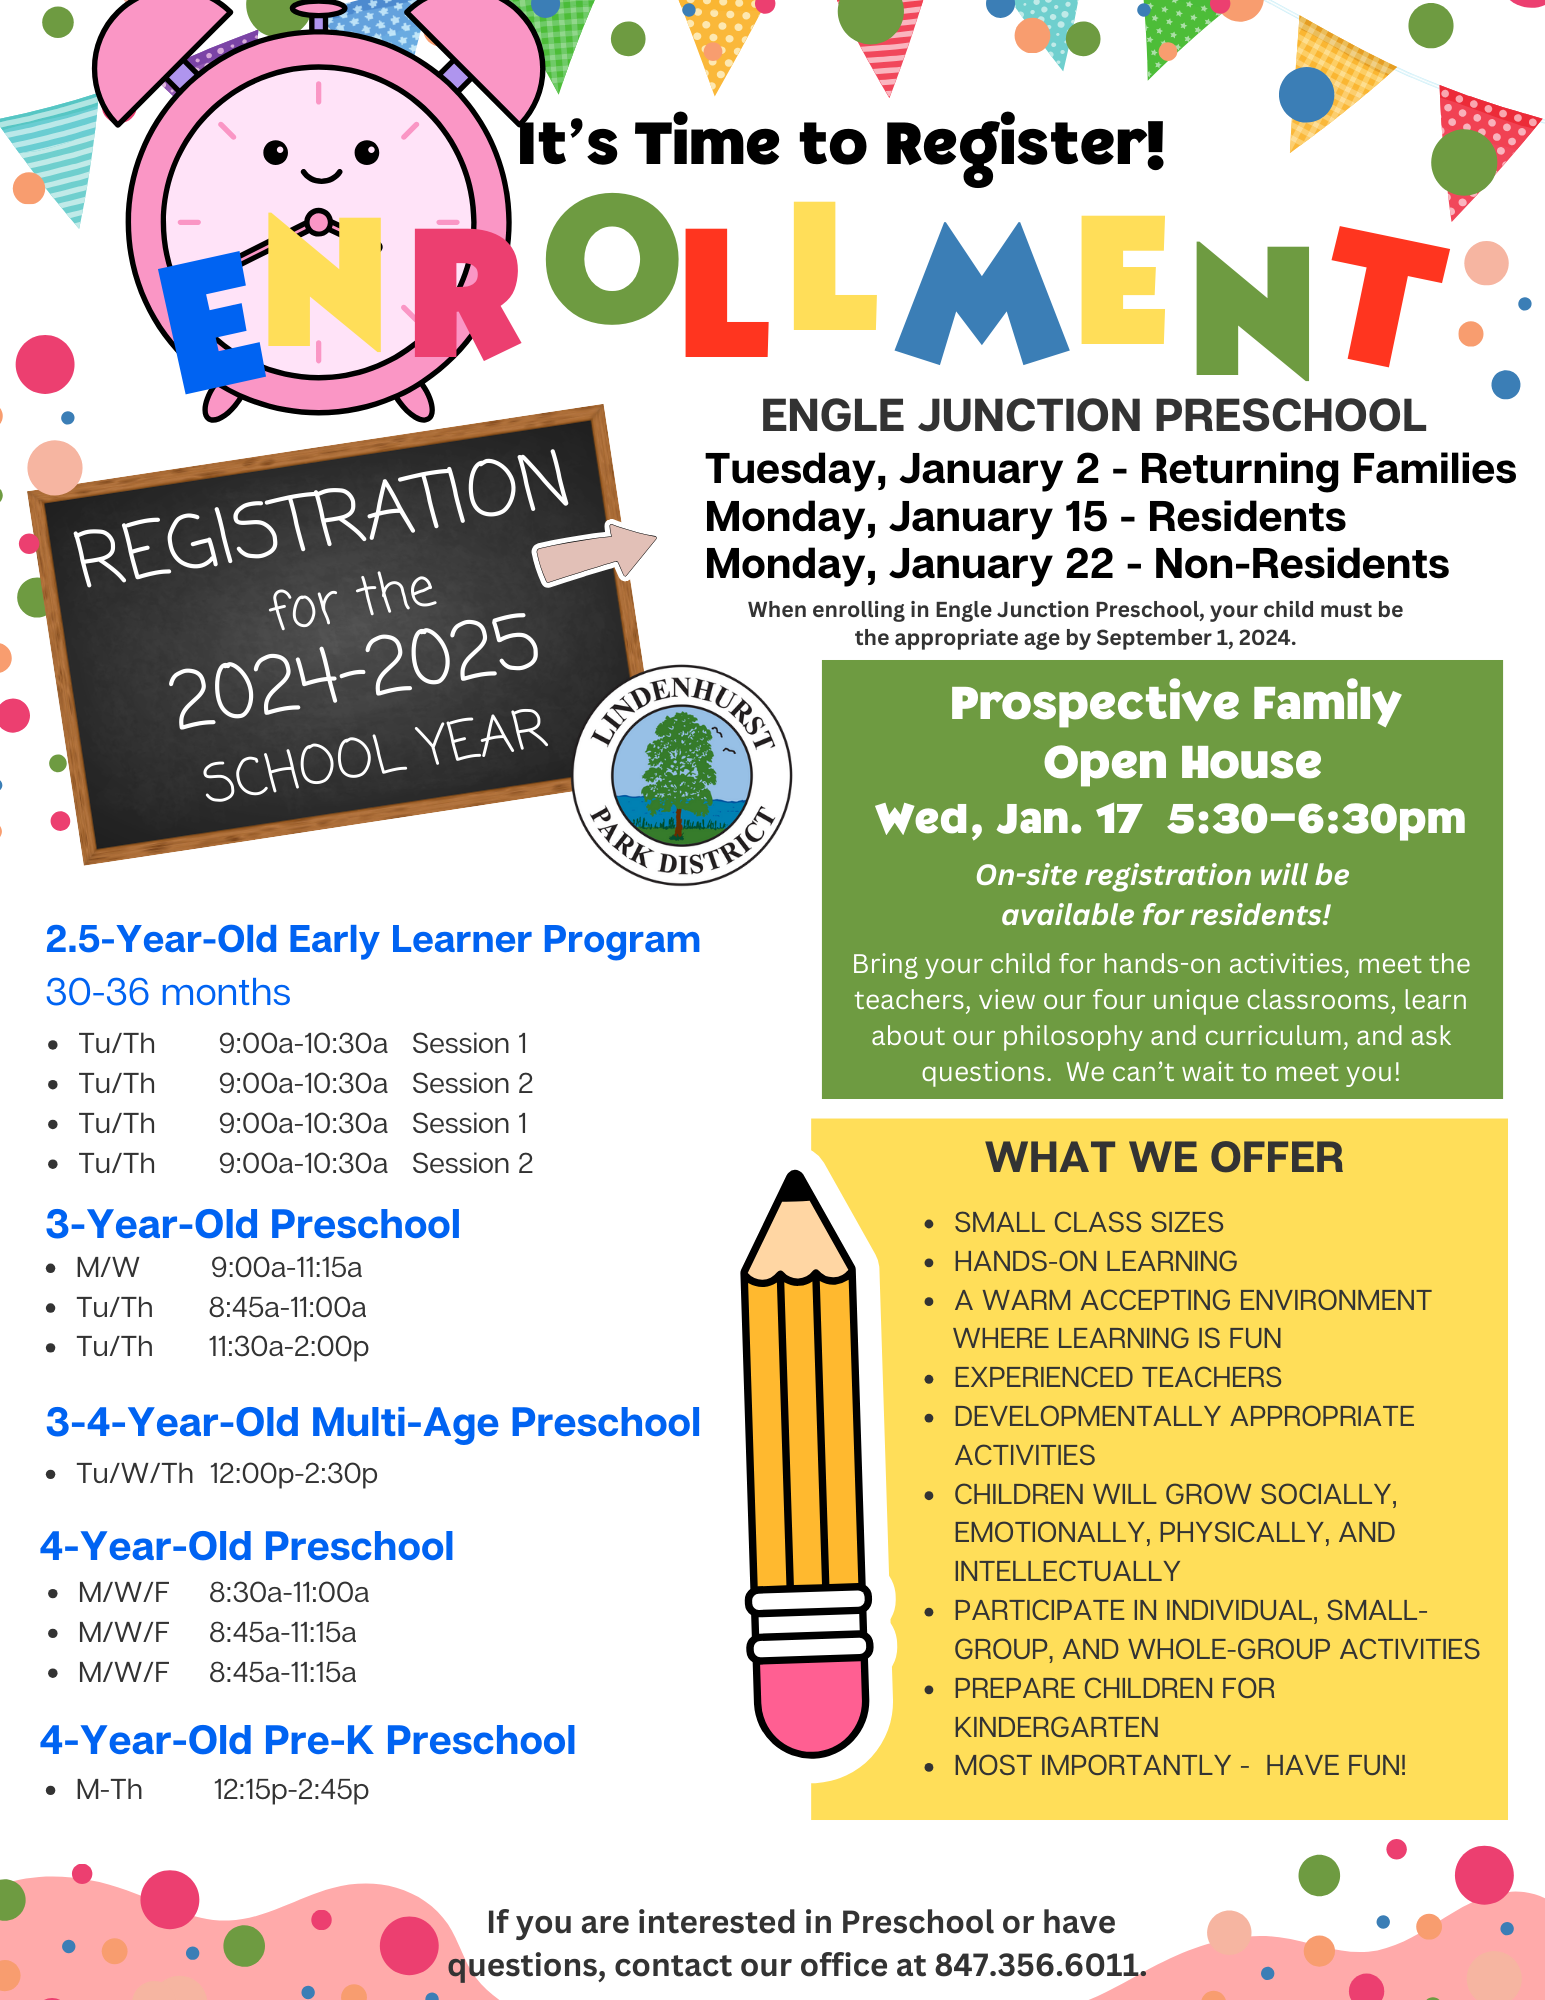 Colorful flyer for preschool registration at the Lindenhurst Park District for the 2024-2025 school year, with dates for returning families, residents, and non-residents. It highlights the early learner program for 2.5-year-olds, preschool programs for 3 and 4-year-olds, multi-age preschool, and pre-K. Features include small class sizes, hands-on learning, and preparation for kindergarten. An open house event is scheduled, and contact details are provided for further inquiries.